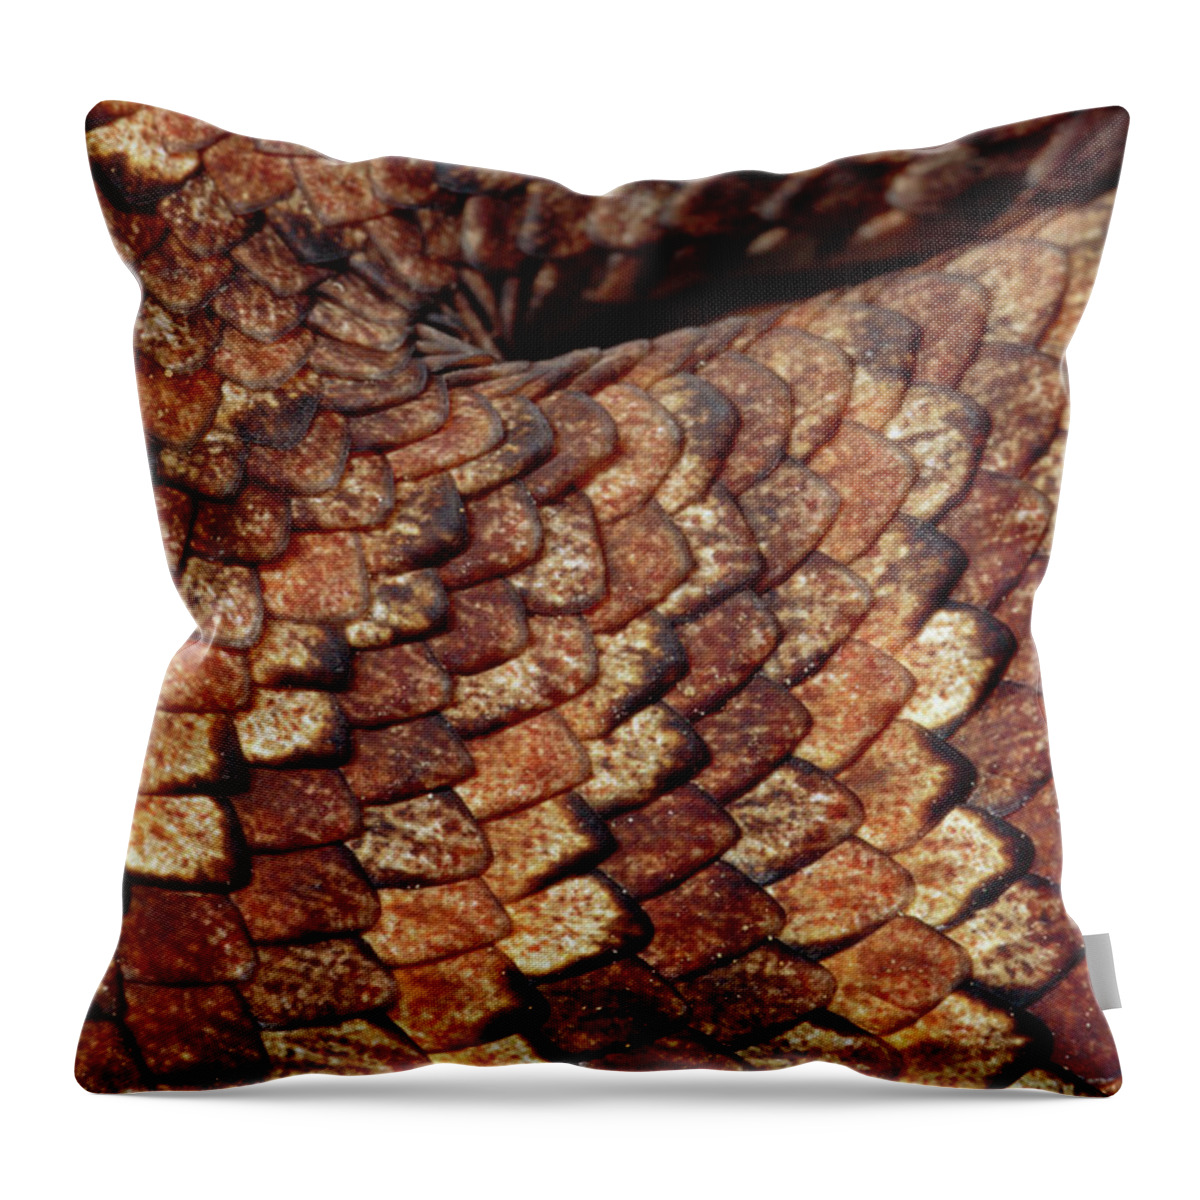 00511539 Throw Pillow featuring the photograph Death Adder Scales by Michael and Patricia Fogden